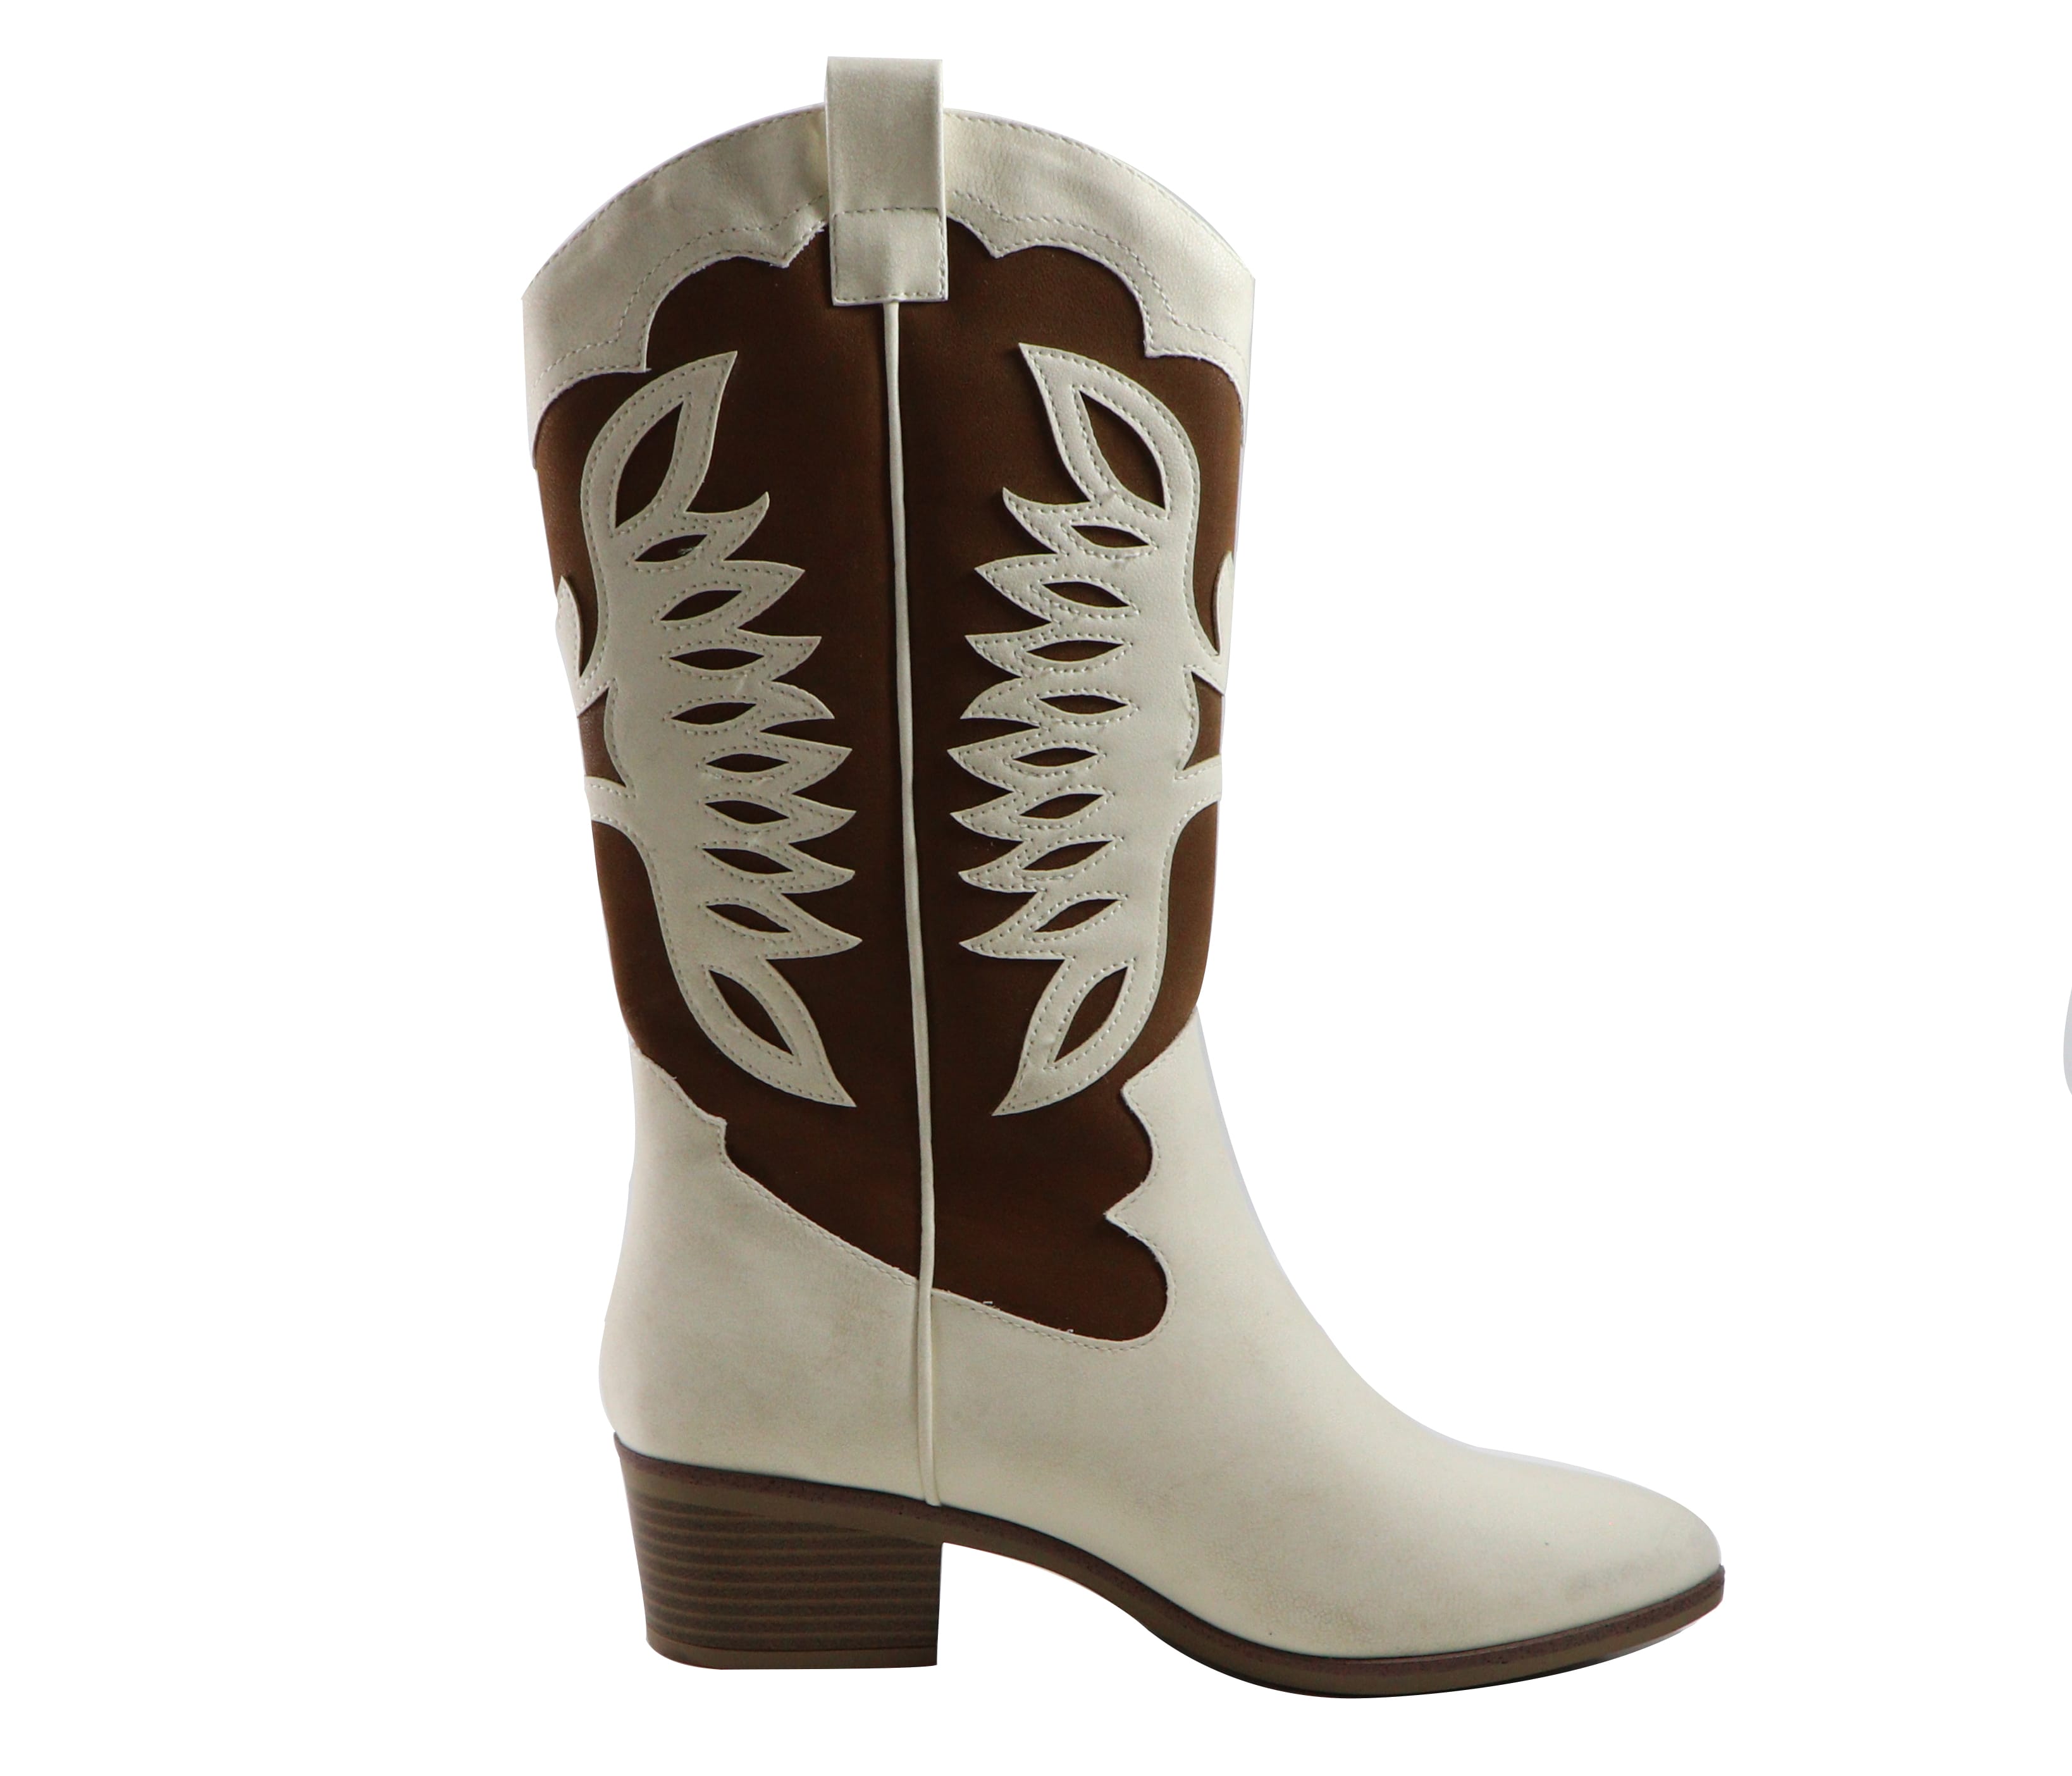 The Pioneer Woman Women's Tall Embroidered Western Boot - image 2 of 6